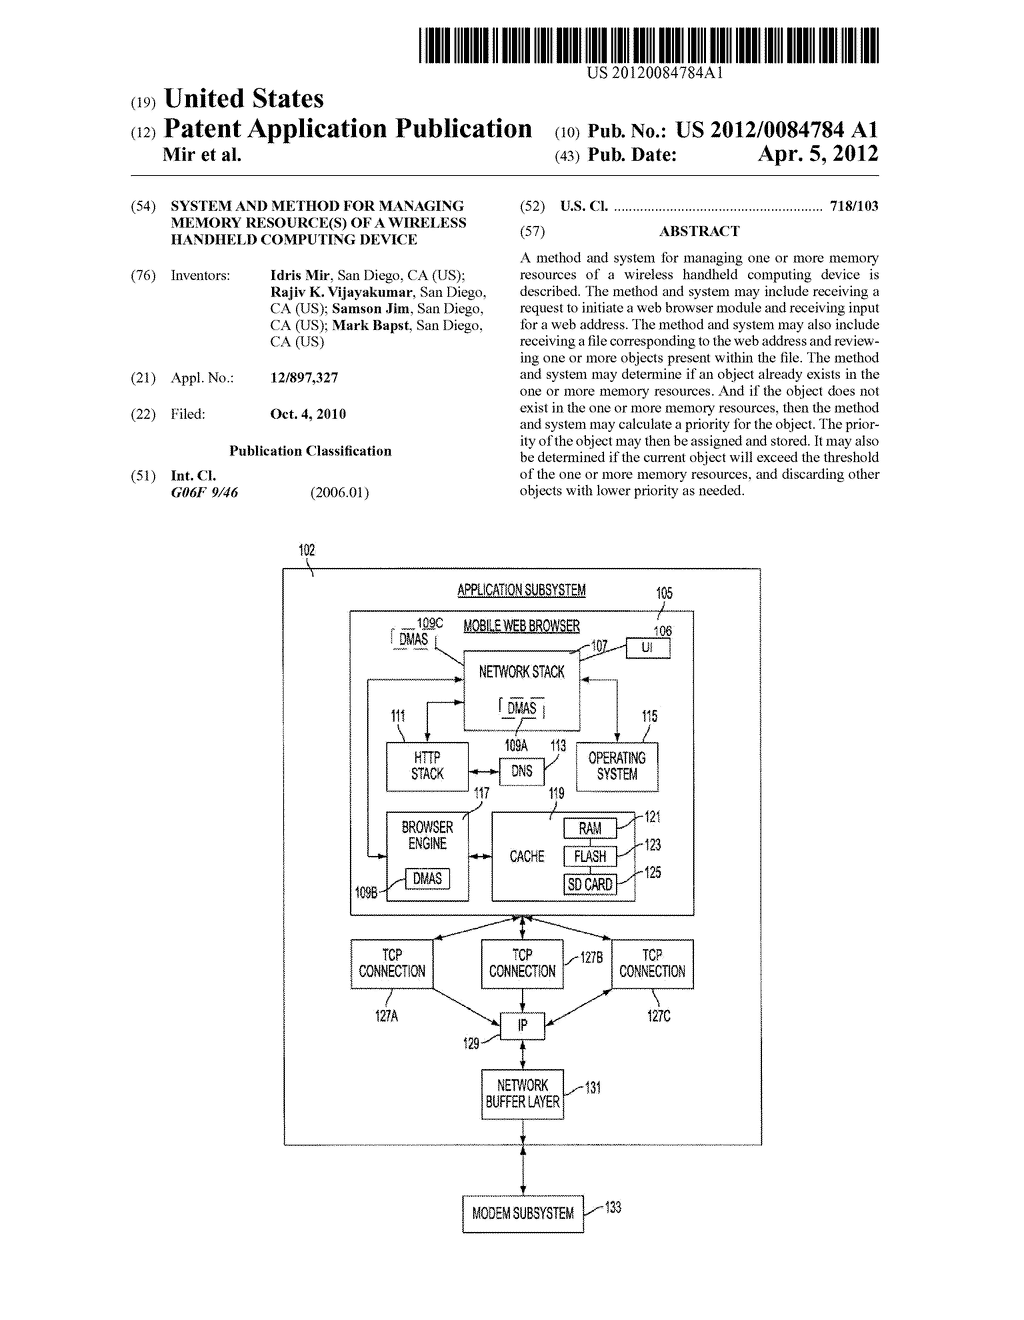 SYSTEM AND METHOD FOR MANAGING MEMORY RESOURCE(S) OF A WIRELESS HANDHELD     COMPUTING DEVICE - diagram, schematic, and image 01